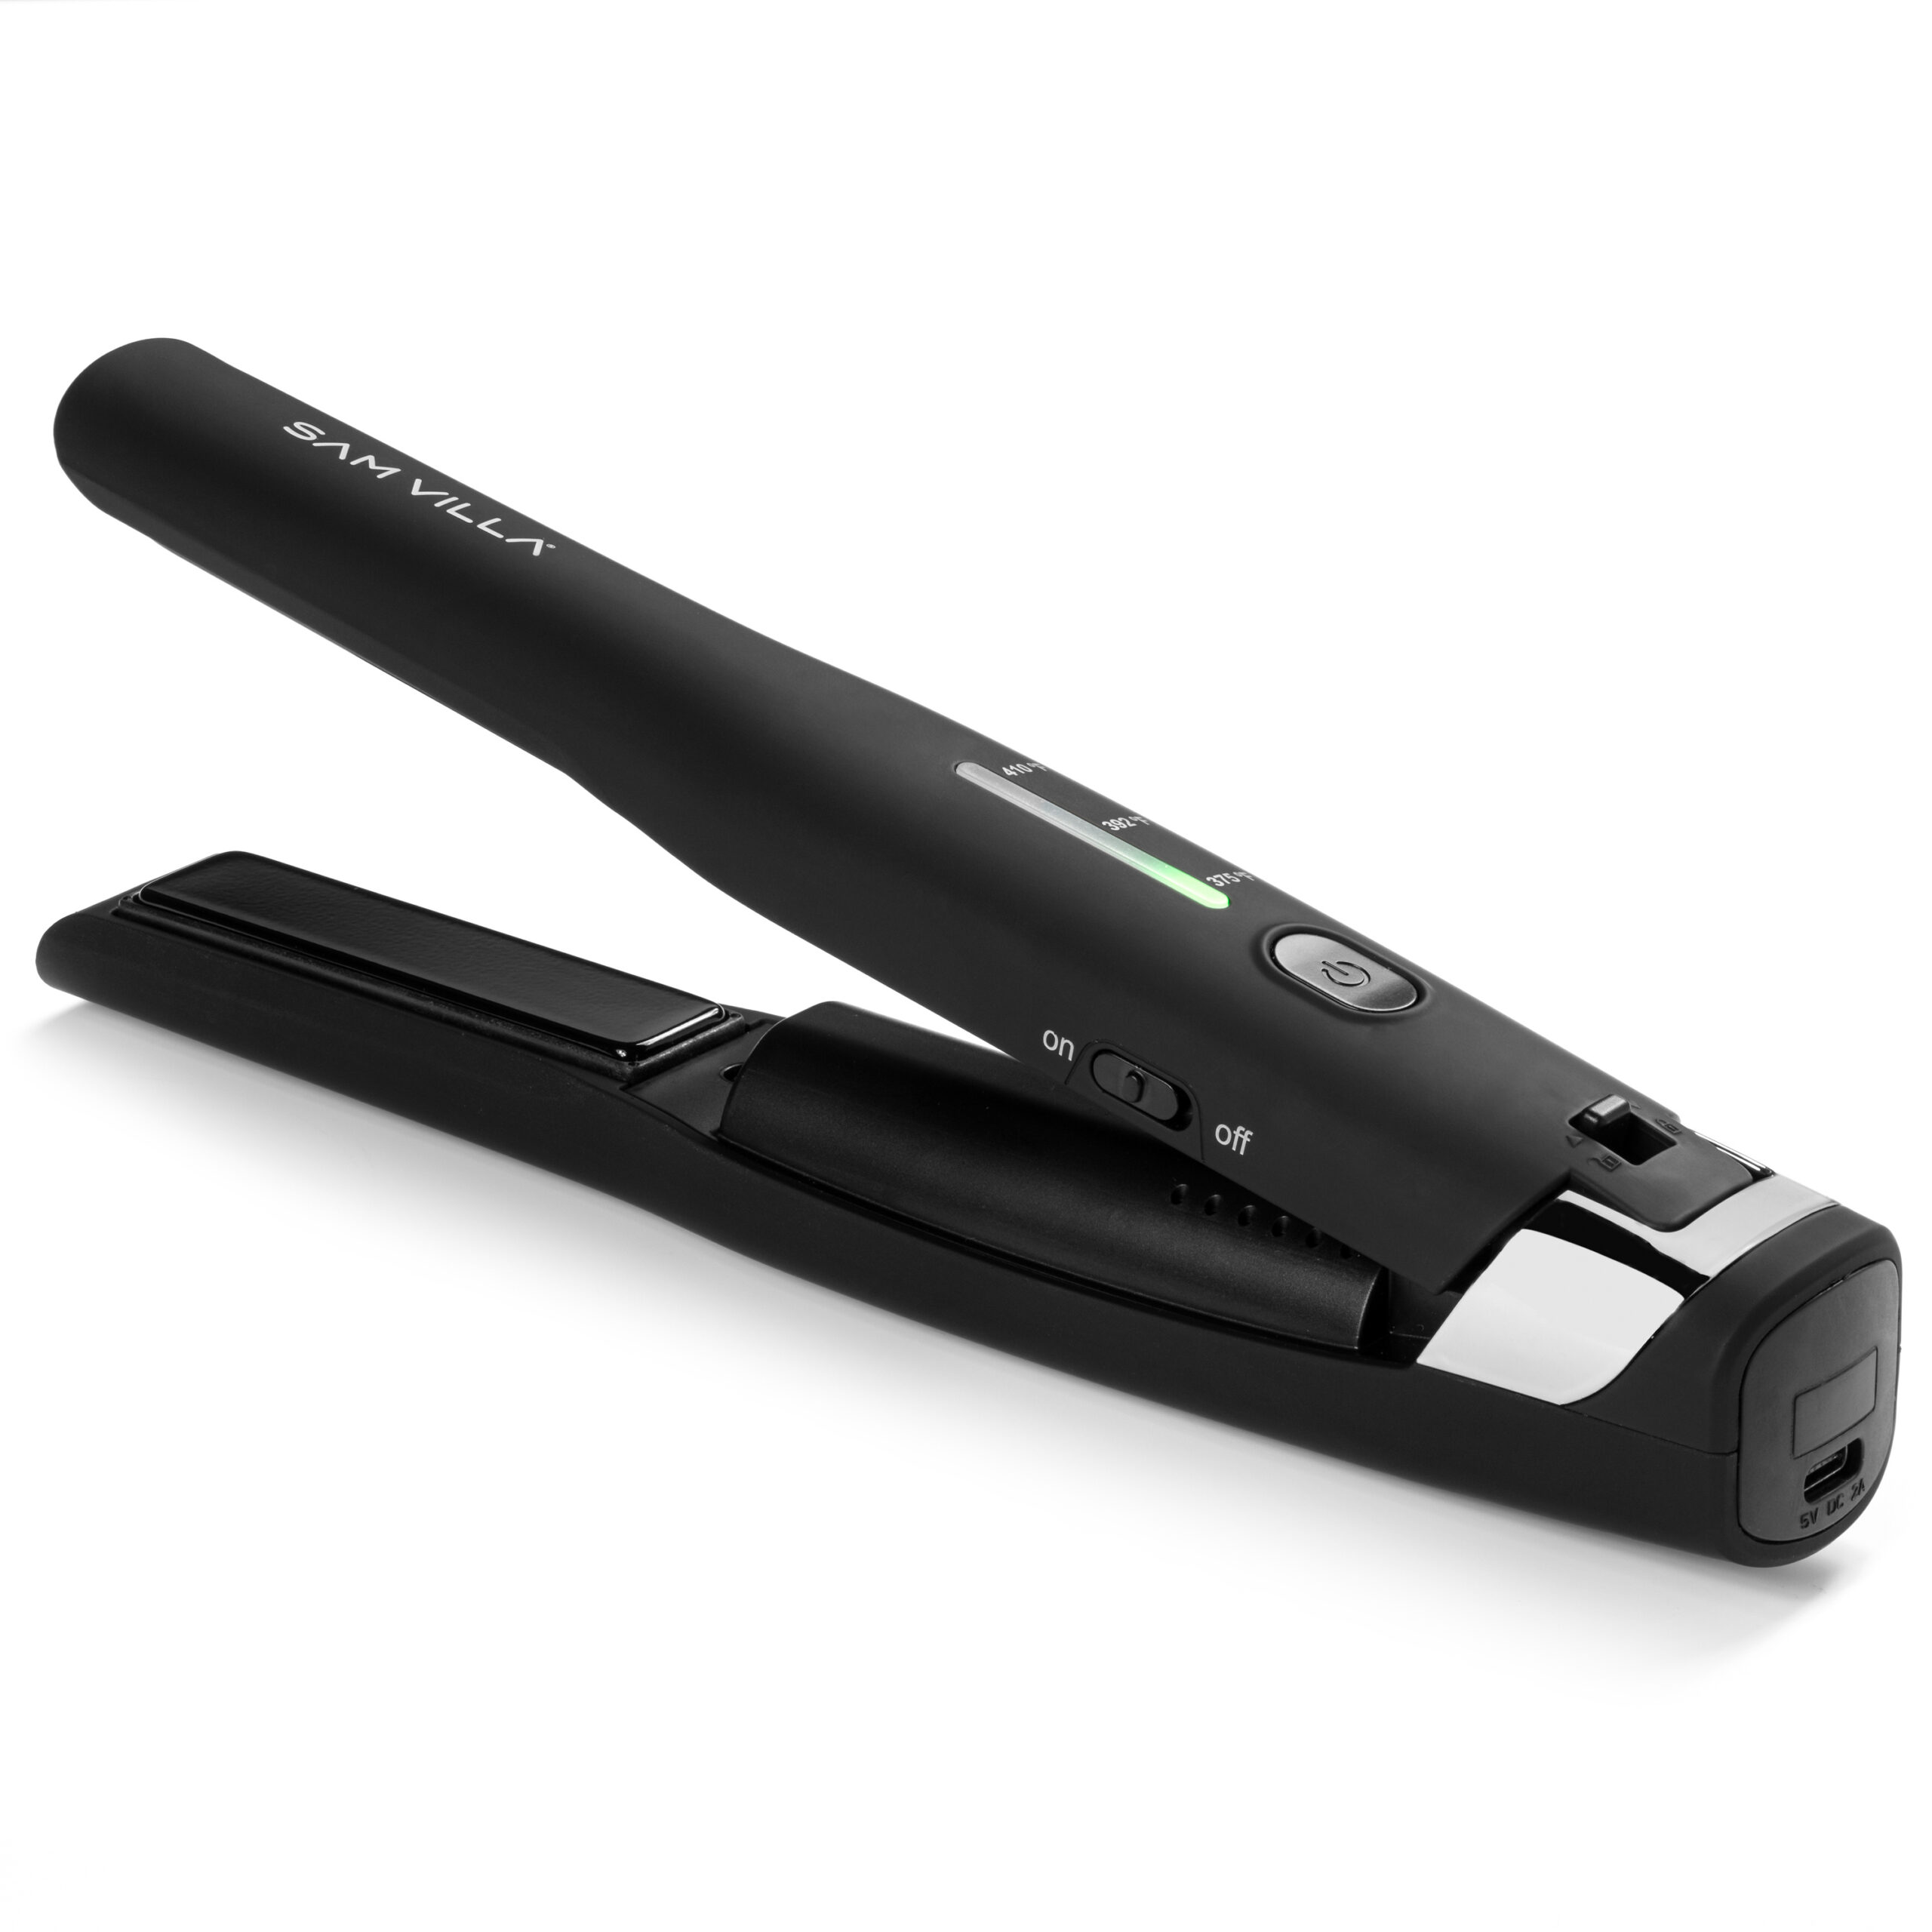 A Cordless Flat Iron Is a Must Have for the Gym - Bangstyle